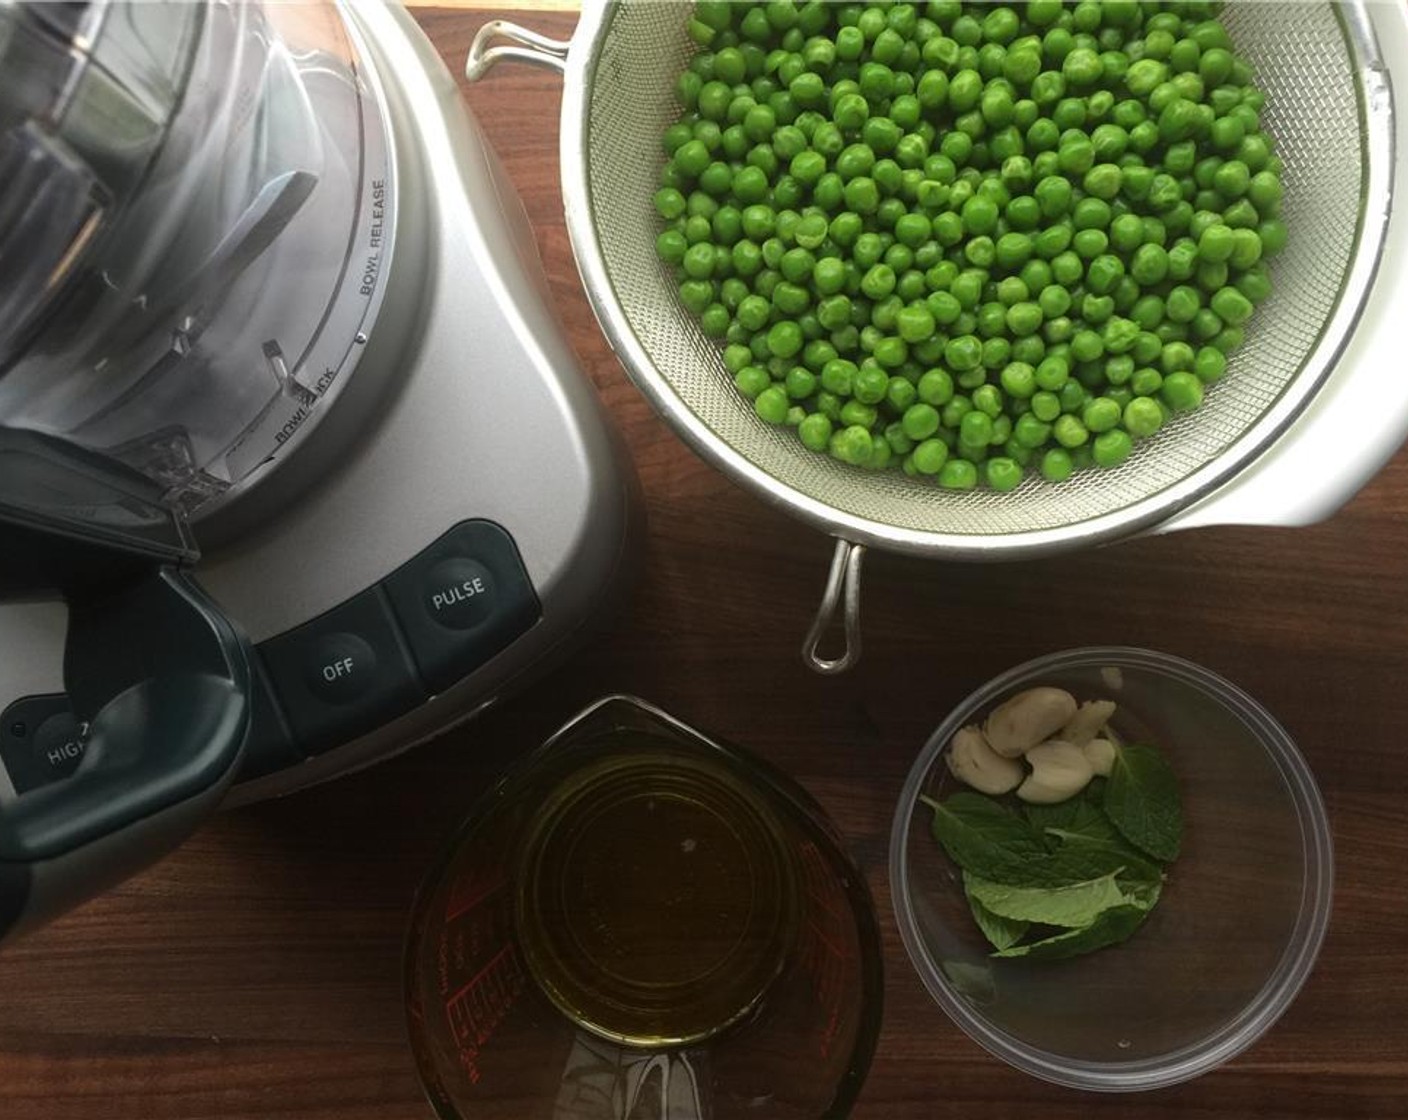 step 1 Place Frozen Green Peas (4 cups), Fresh Mint Leaves (10), Garlic (2 cloves), Salt (1/2 tsp), Ground Black Pepper (1/8 tsp), and Extra-Virgin Olive Oil (1/3 cup) in a food processor.